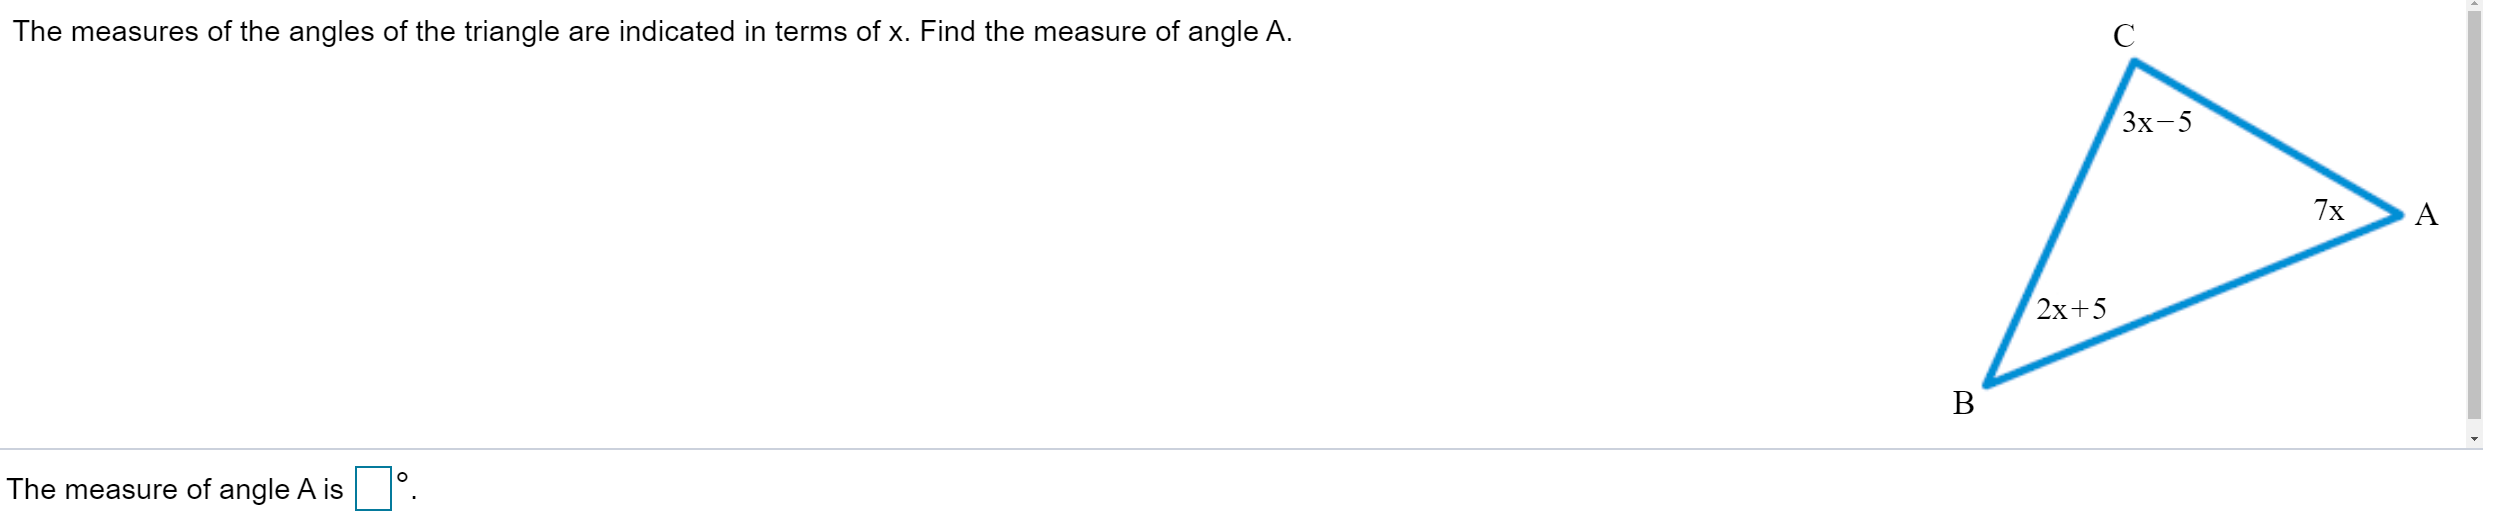 The measures of the angles of the triangle are indicated in terms of x. Find the measure of angle A.
Зх-5
7x
2х+5
B
The measure of angle A is
